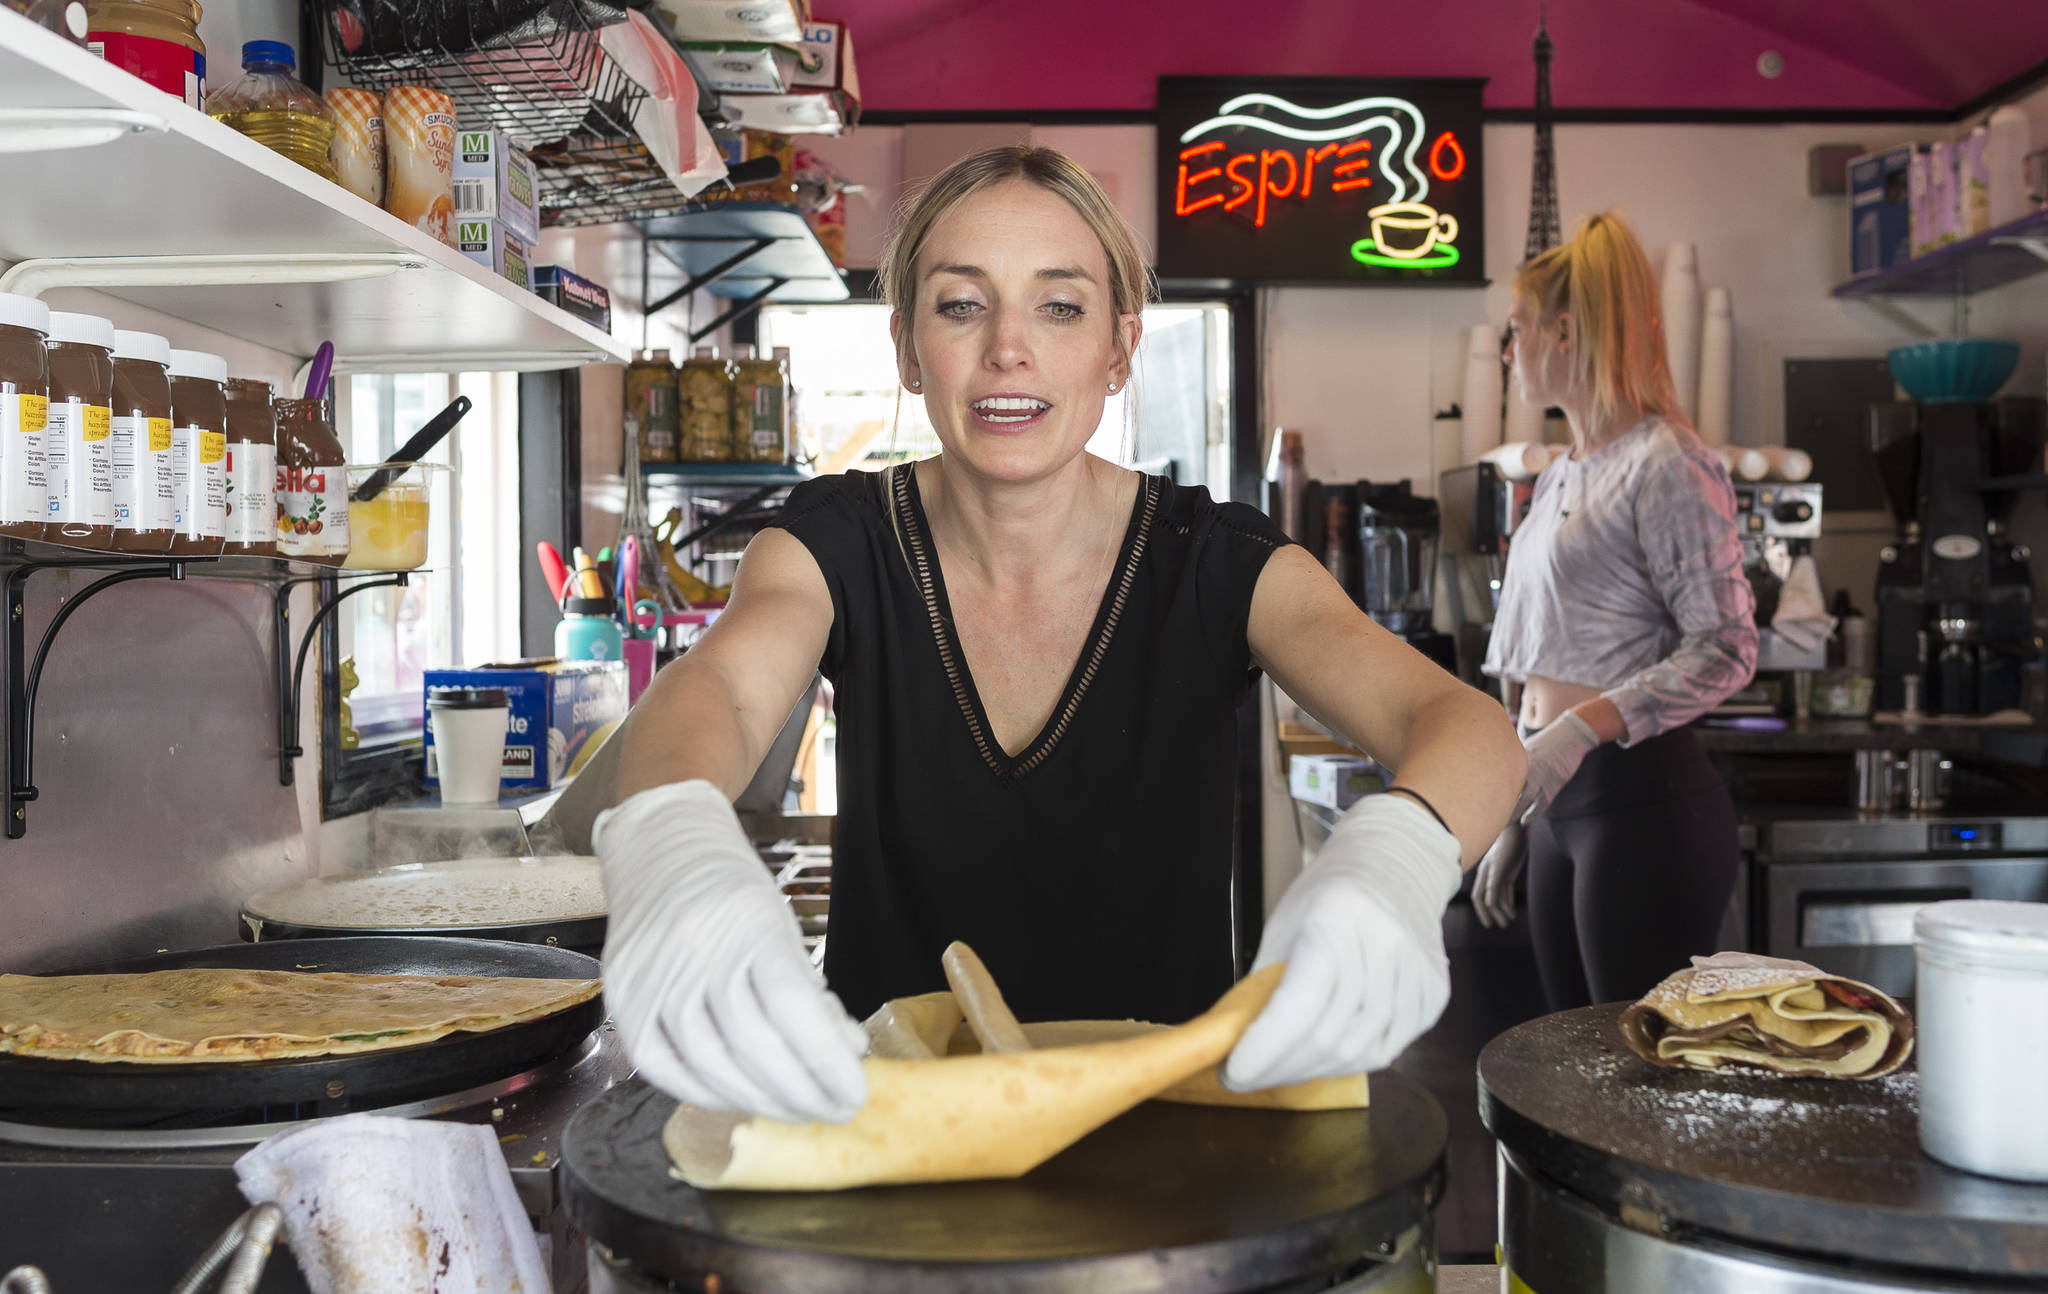 Crepe Escape owner Amanda Kohan talks about her recent break-in while making crepes during the lunchtime rush on Tuesday, May 15, 2018. (Michael Penn | Juneau Empire)